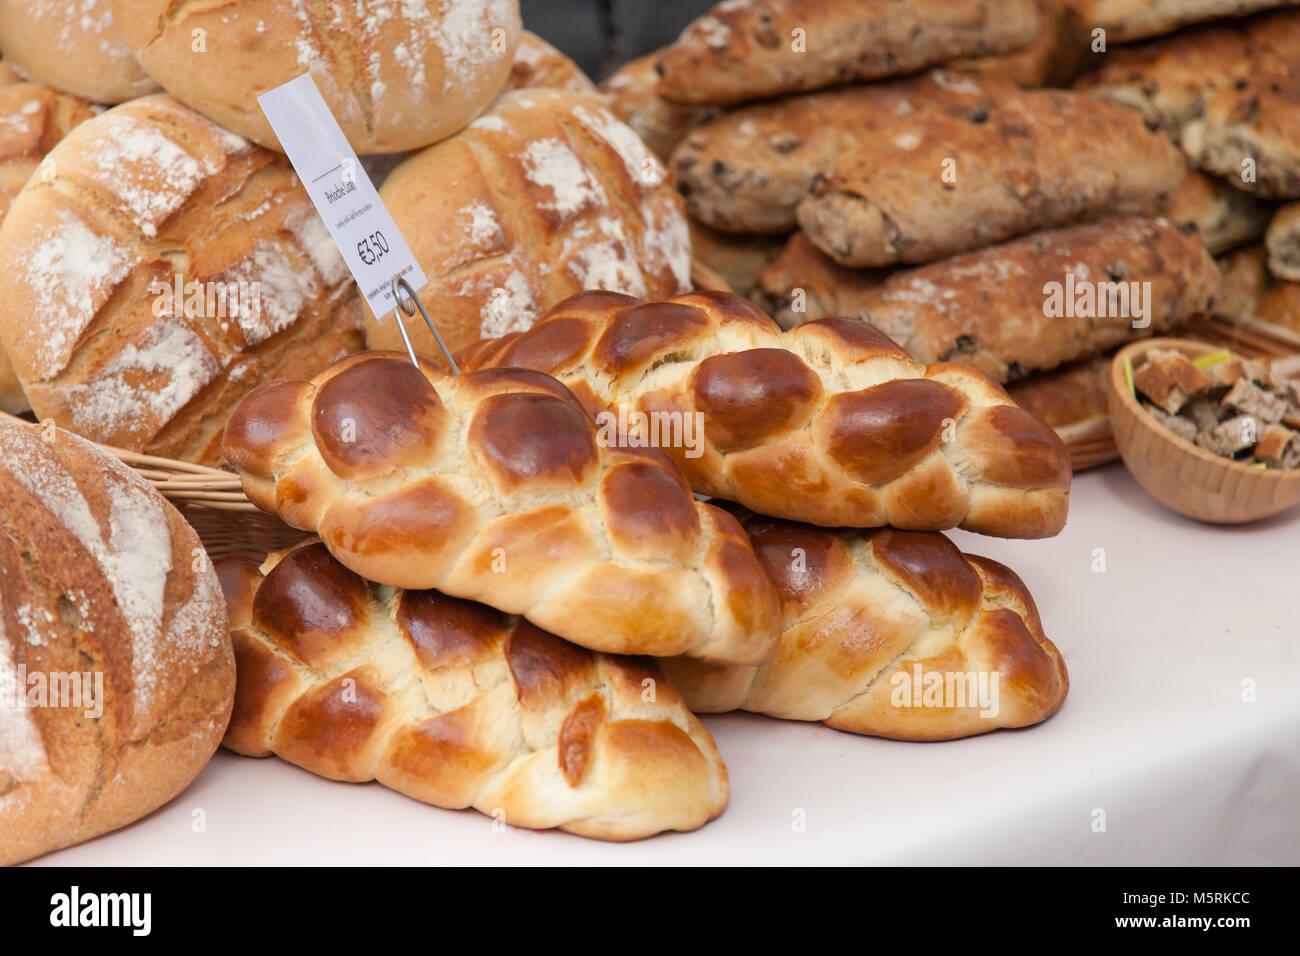 Fresh Bake Bread on sale at a bakery Stock Photo